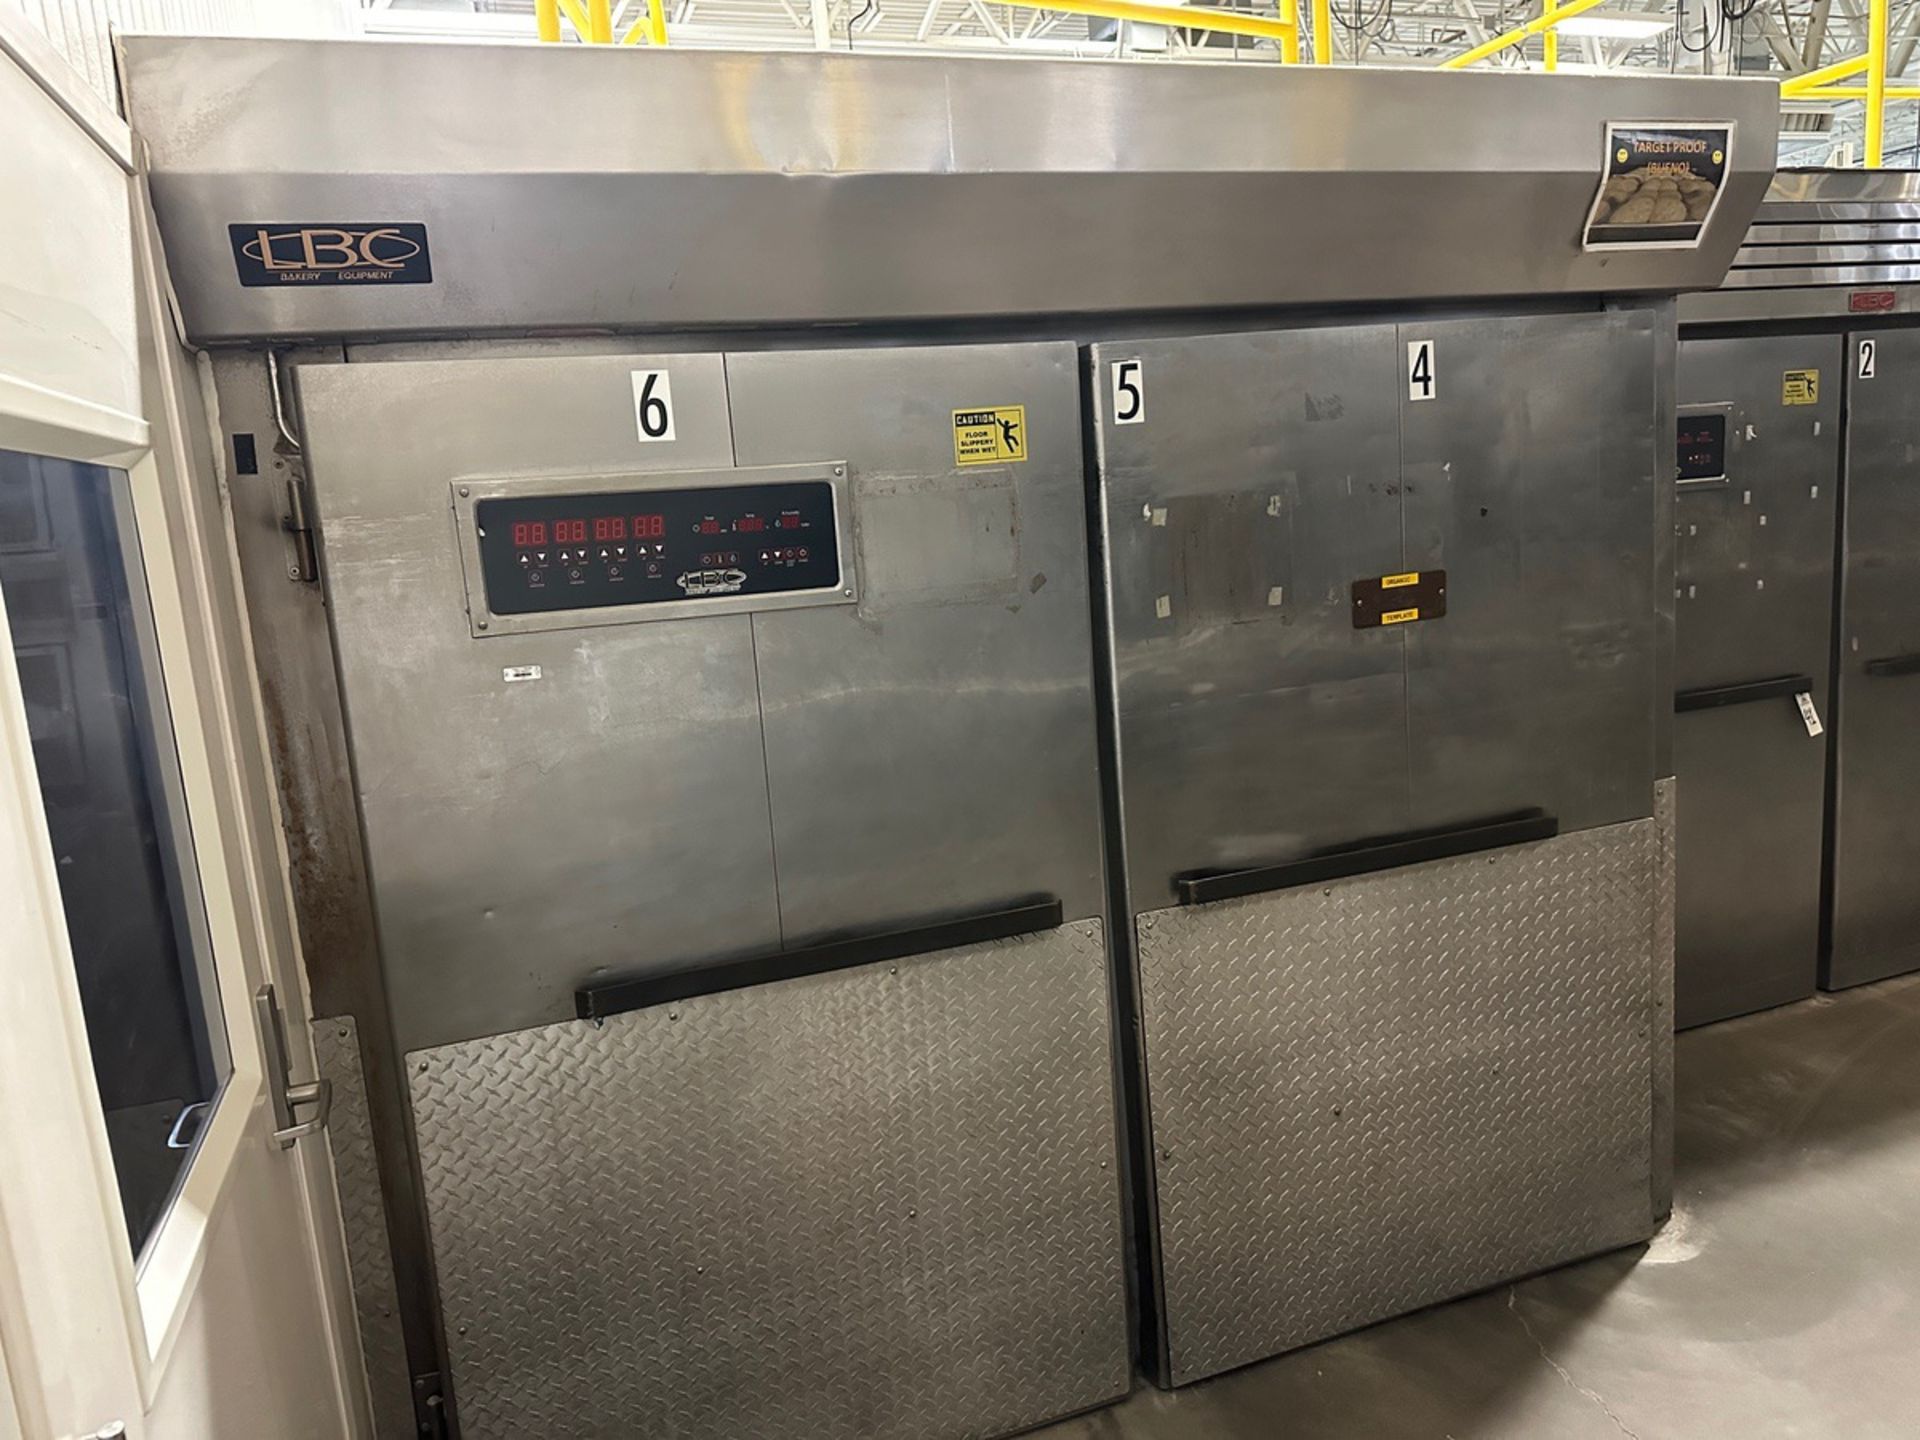 LBC Model LRP3 Proofer Oven - S/N S 69020 (Approx. 7'6" x 18') | Rig Fee $3500 - Image 5 of 6